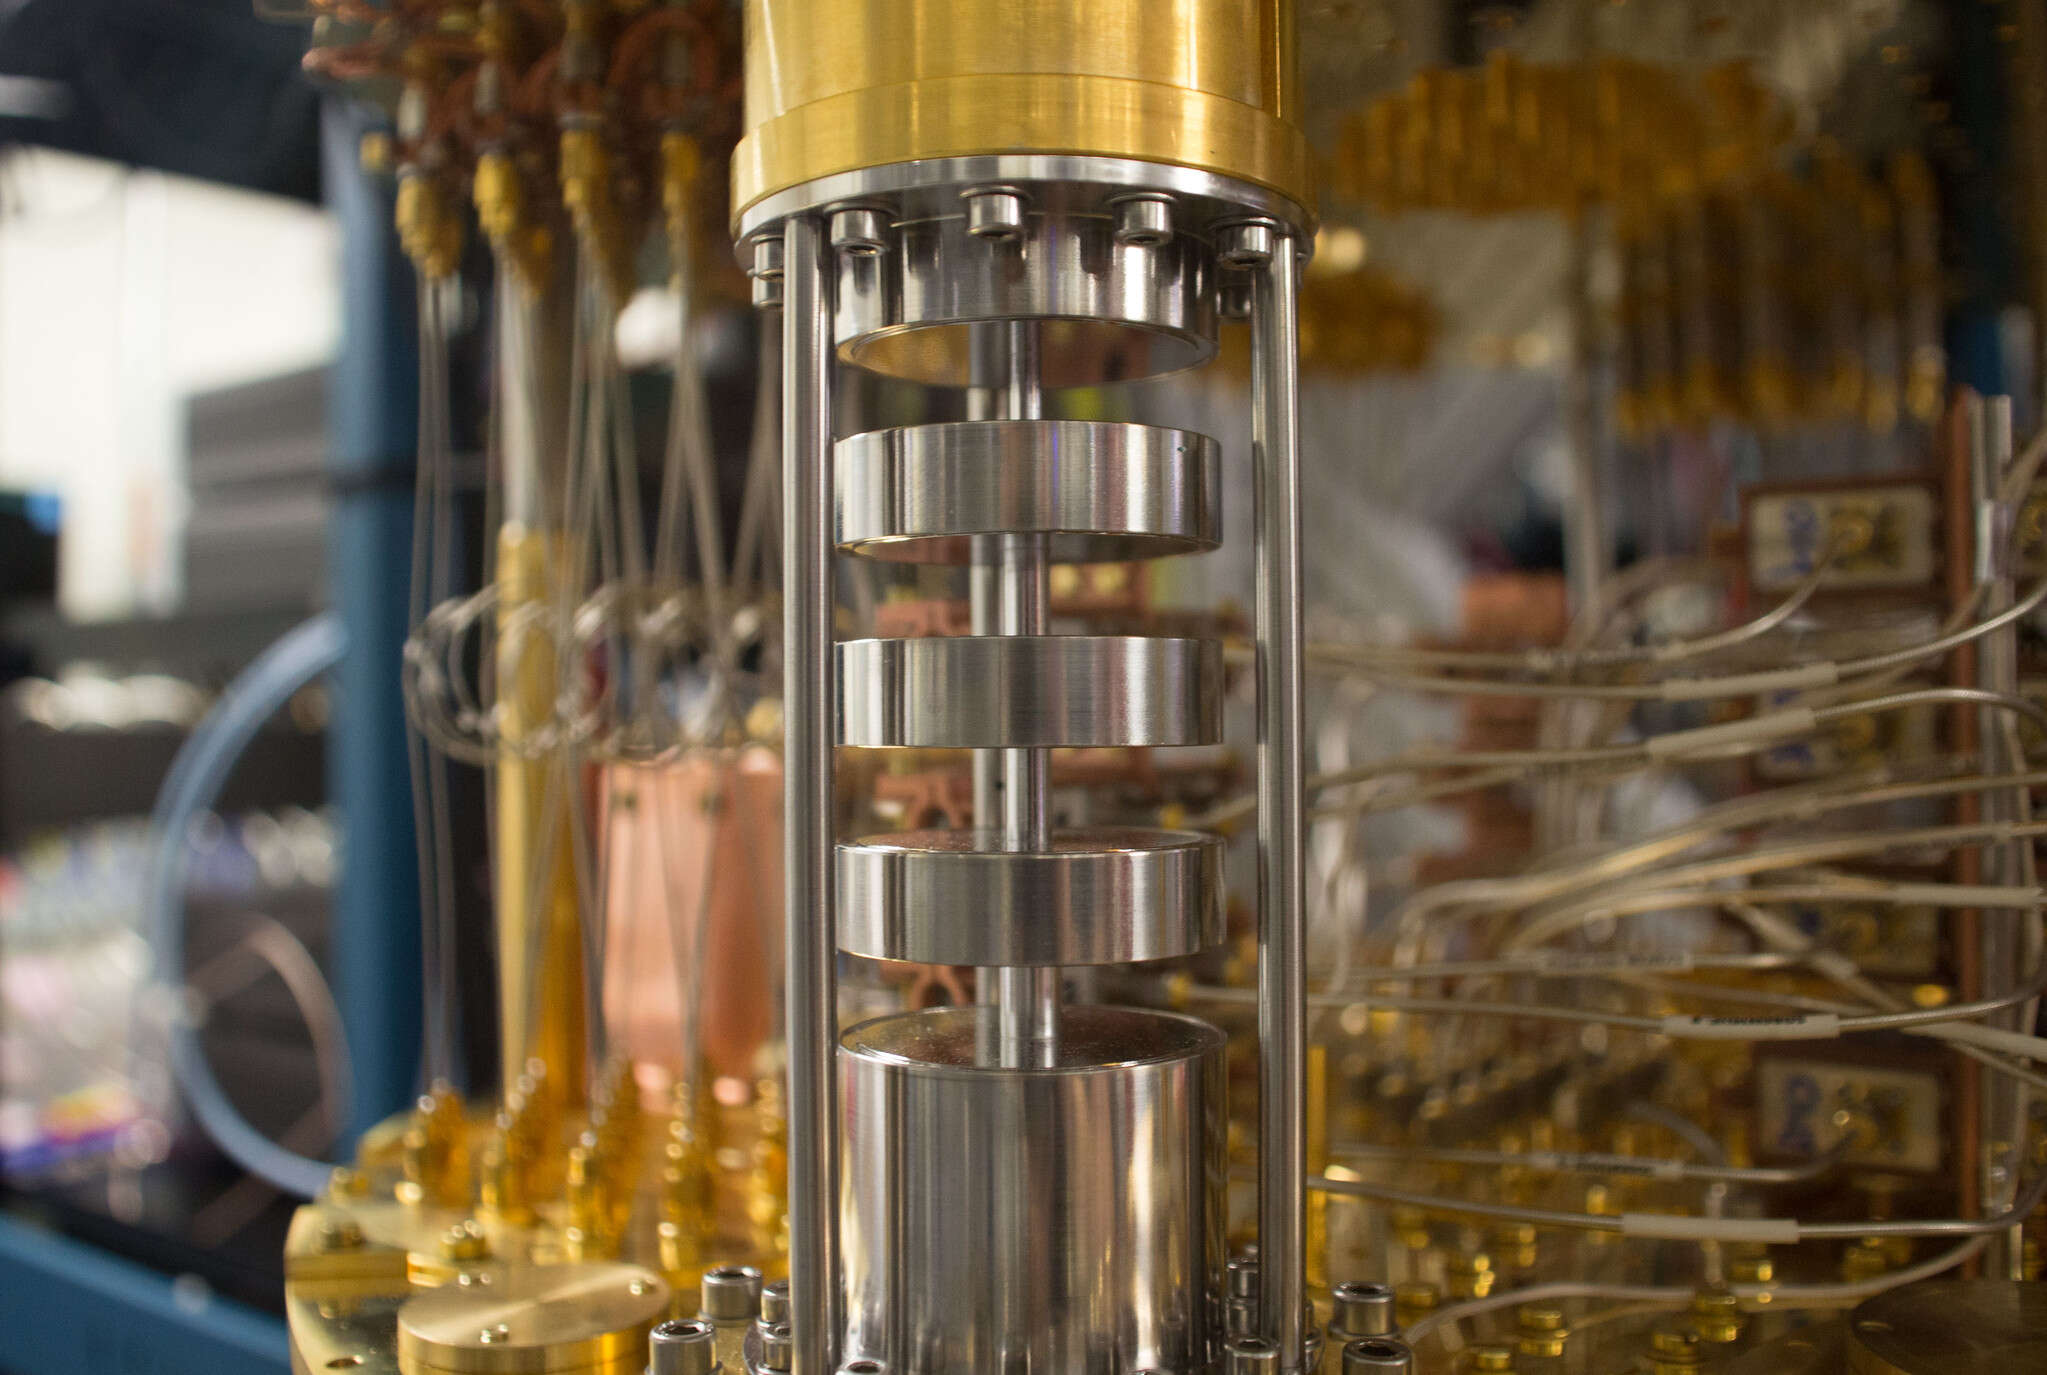 Tech leaders should act now to counter the threat of quantum decryption